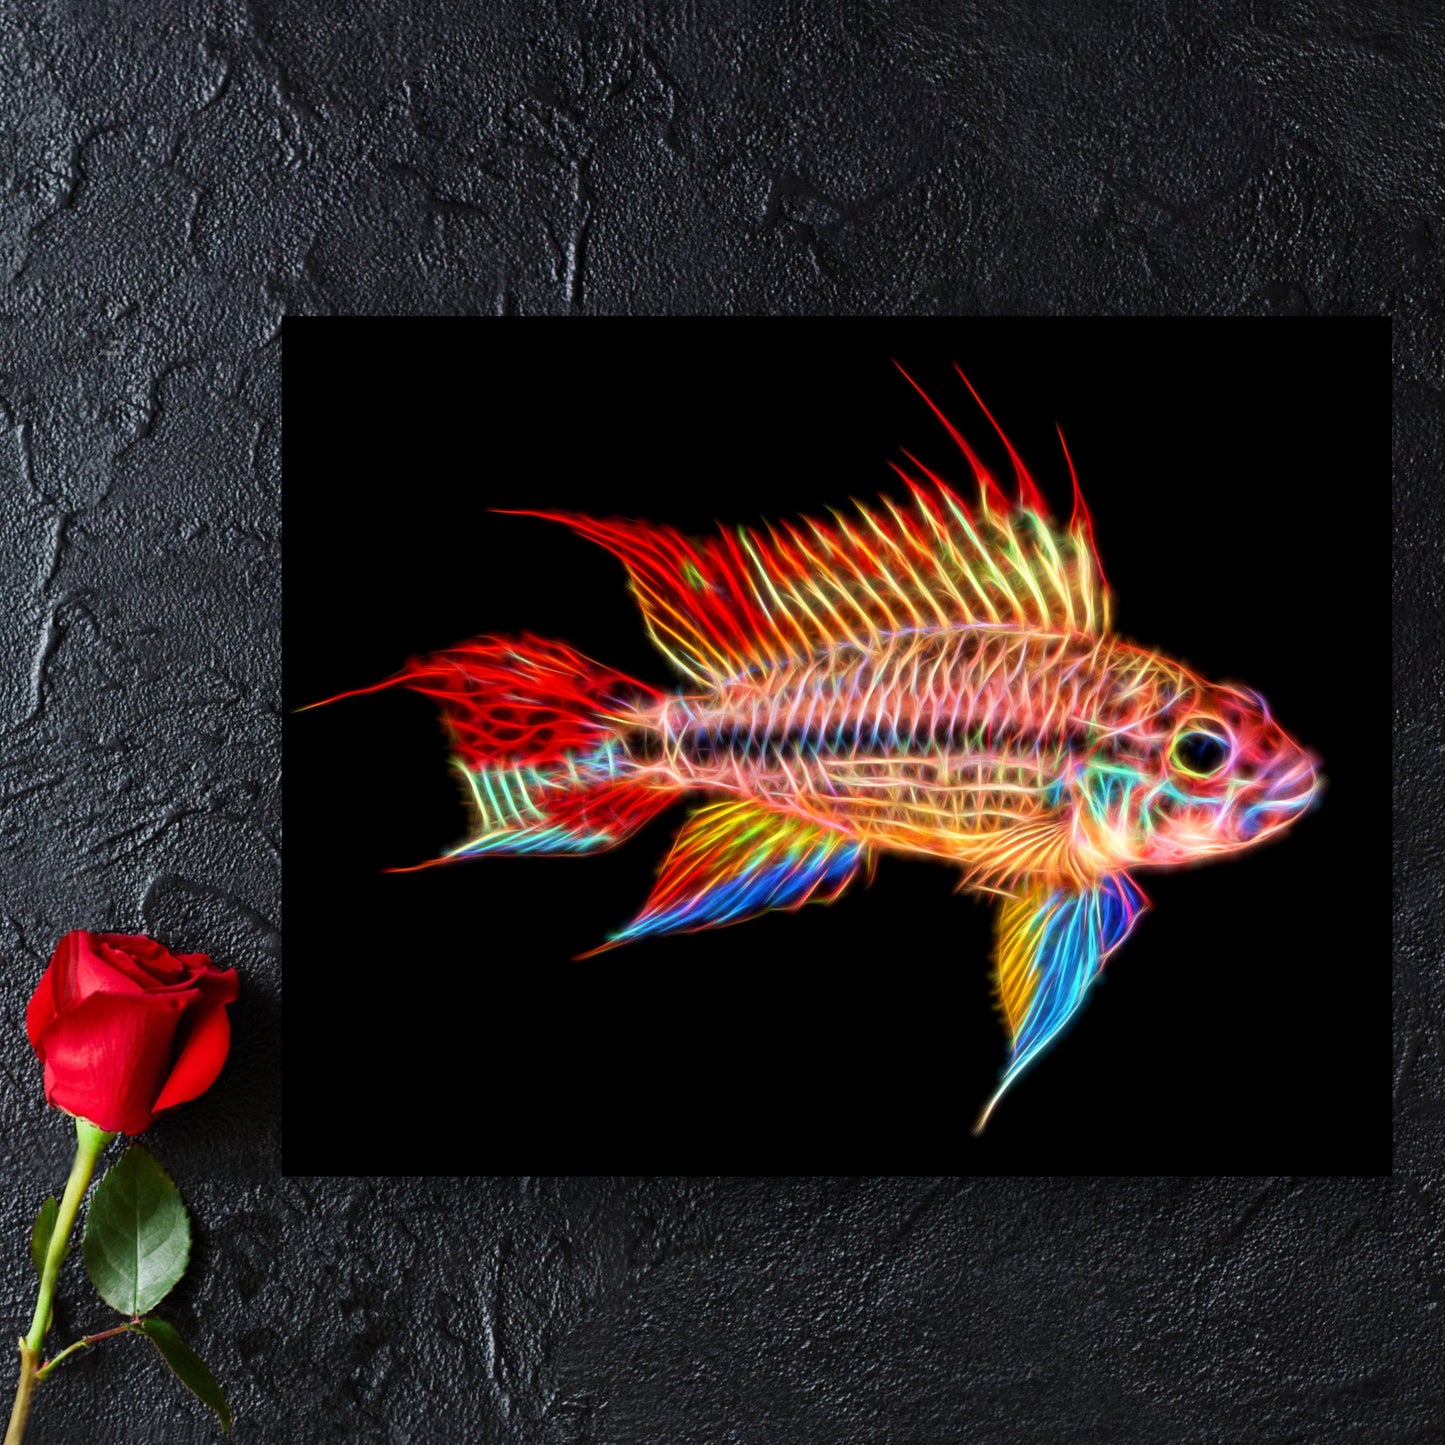 Super Red Cockatoo Dwarf Cichlid Fish Print with Stunning Fractal Art Design. Size 8 x 10 inches